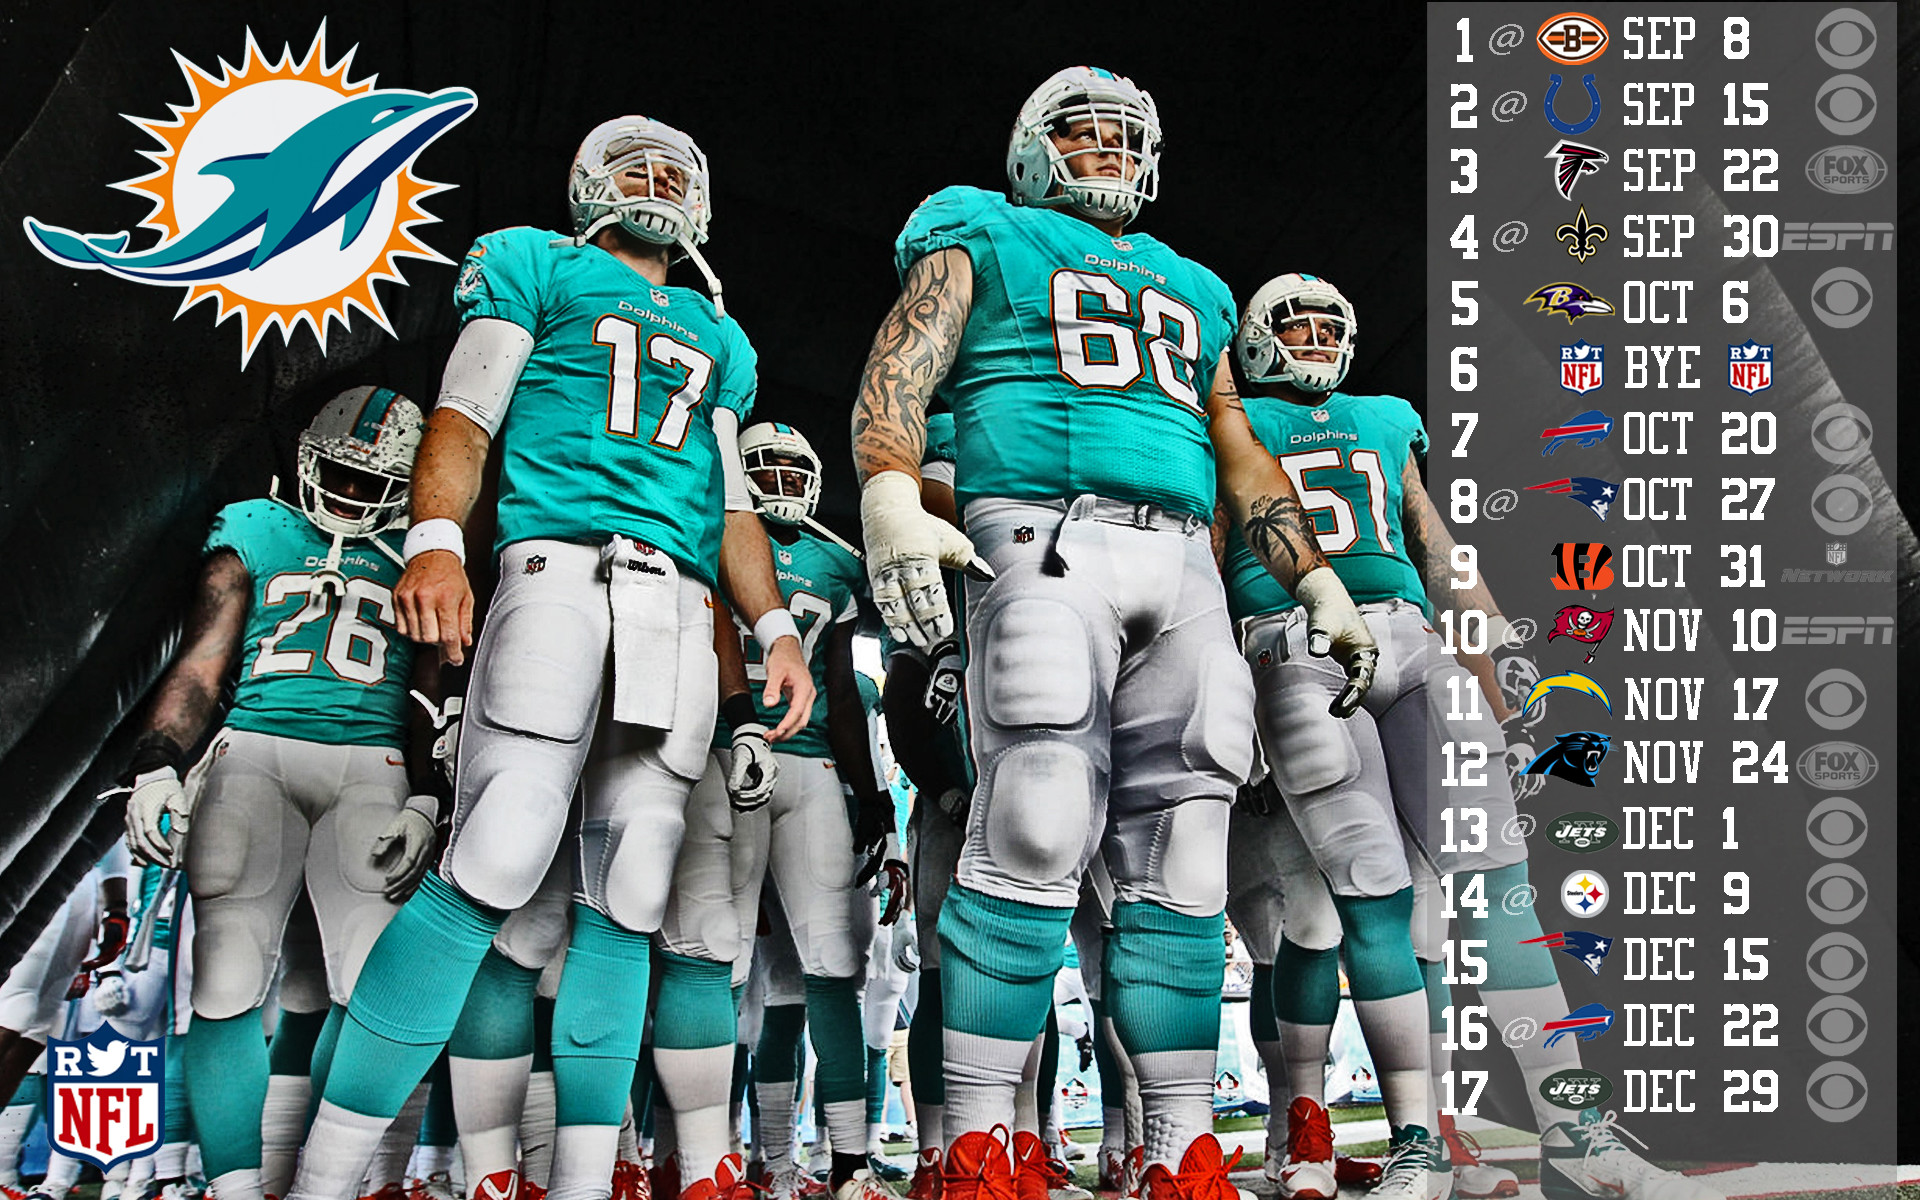 2013 Miami Dolphins football nfl g wallpaper background